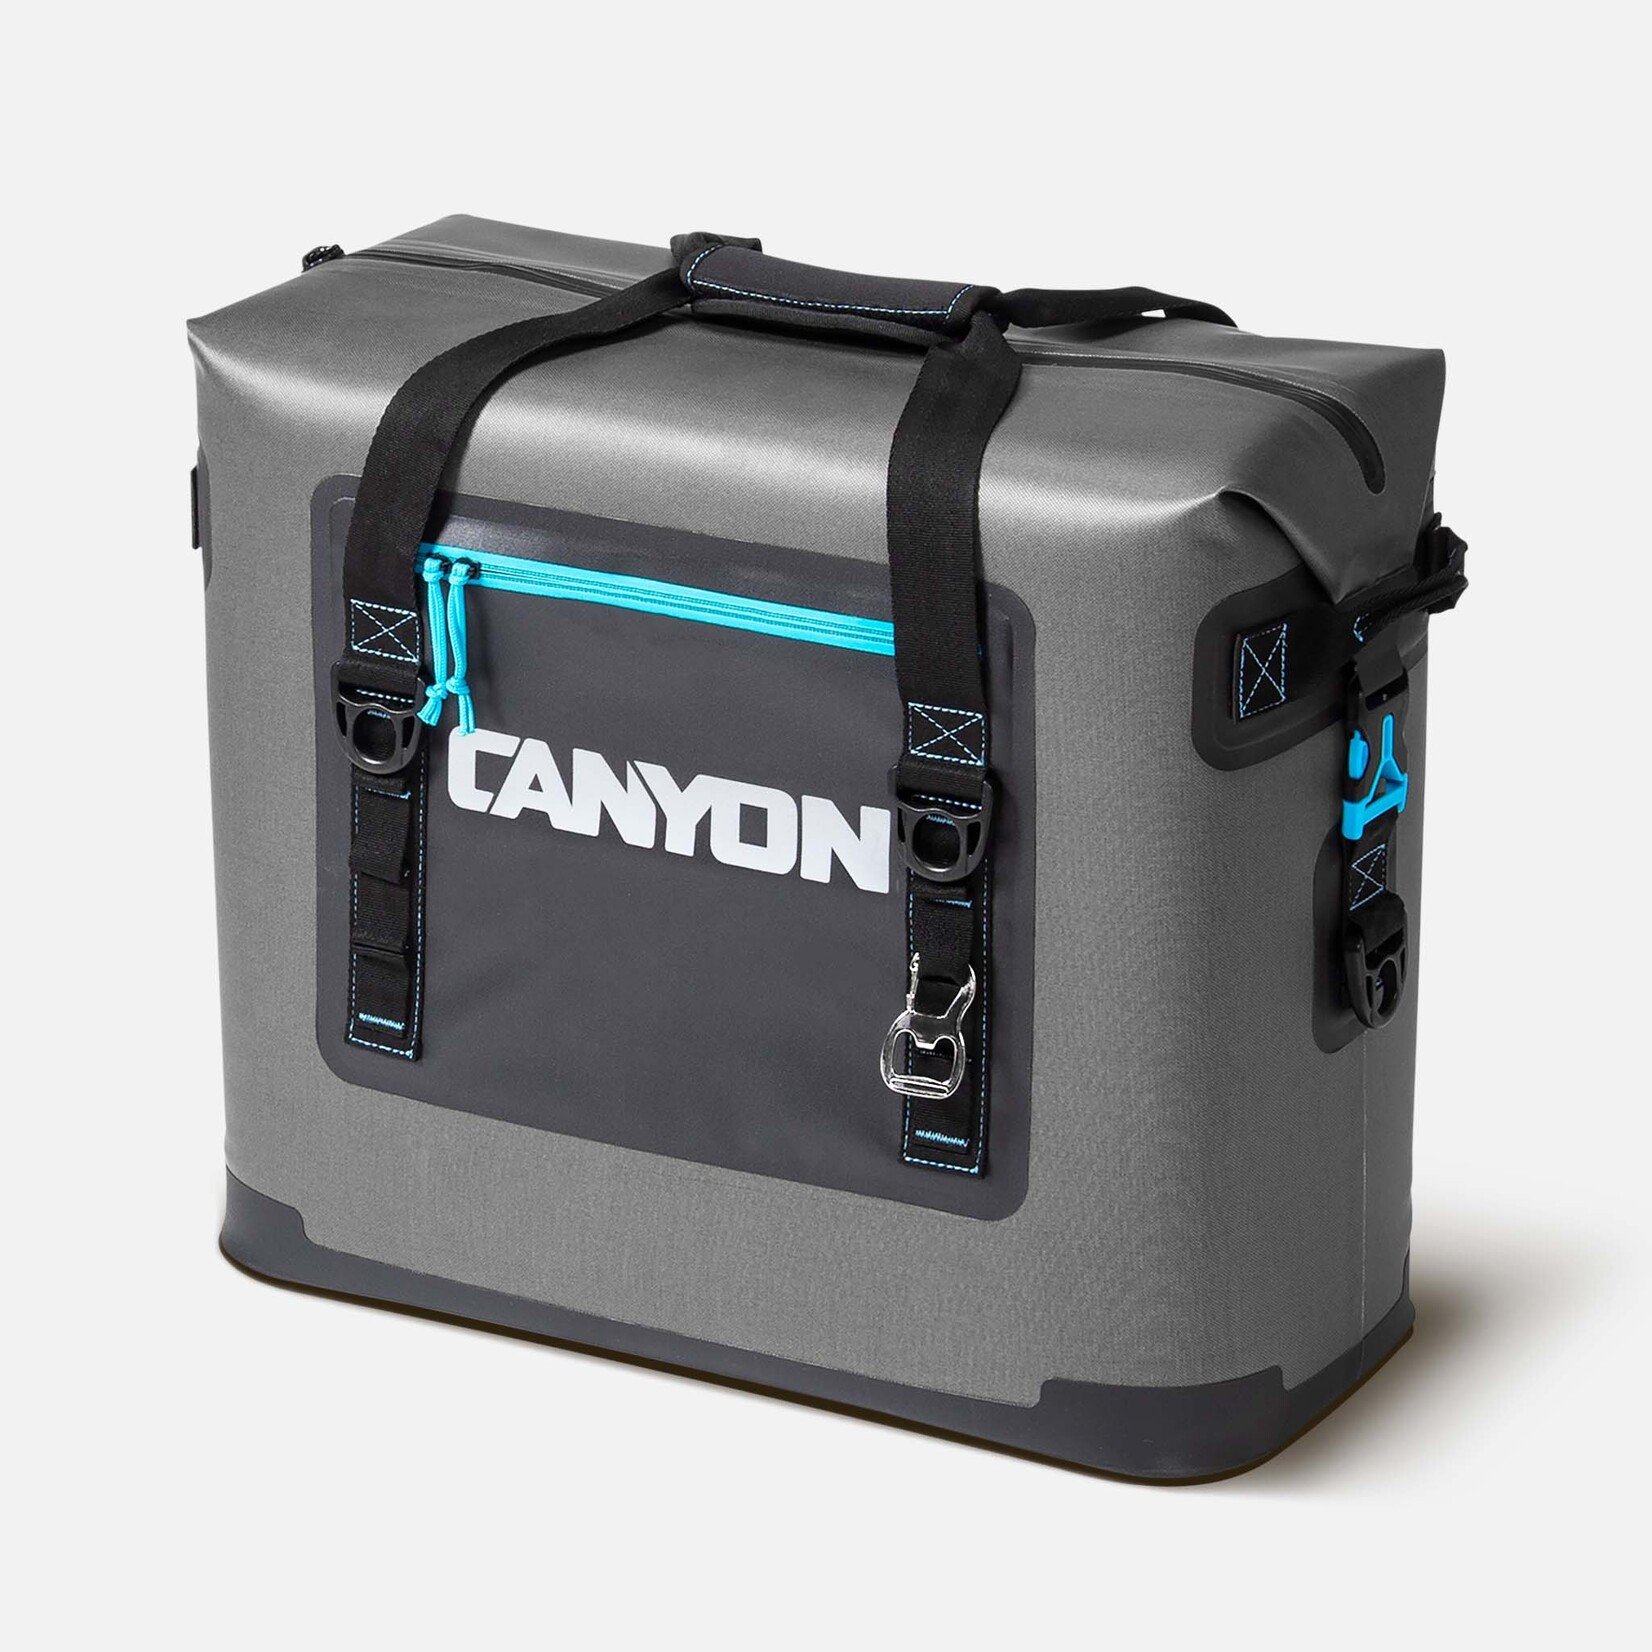 Canyon Coolers Nomad Soft Cooler